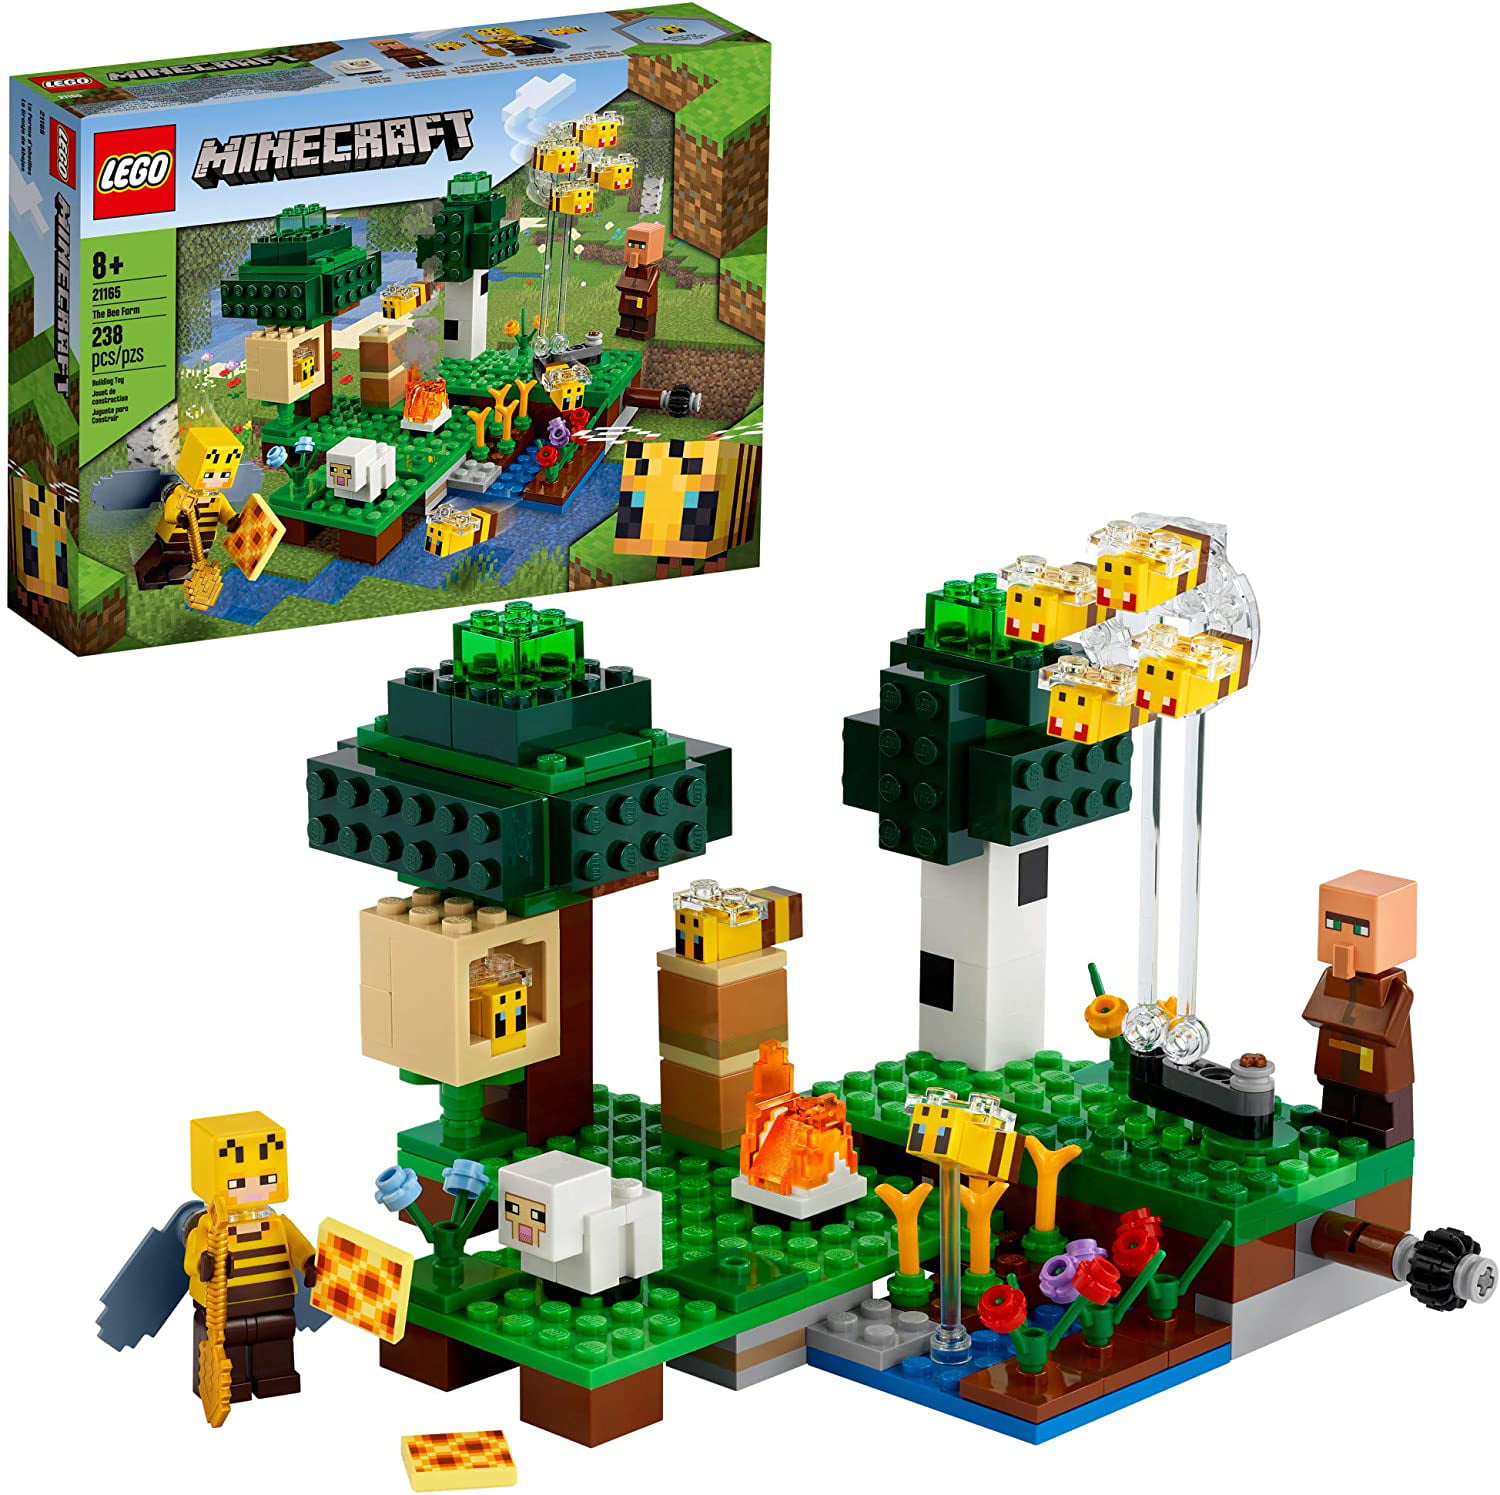 LEGO Minecraft The Bee Farm 21165 Minecraft Building Action Toy with a Beekeeper Plus Cool Bee and Sheep Figures 238 Pieces New 2021 